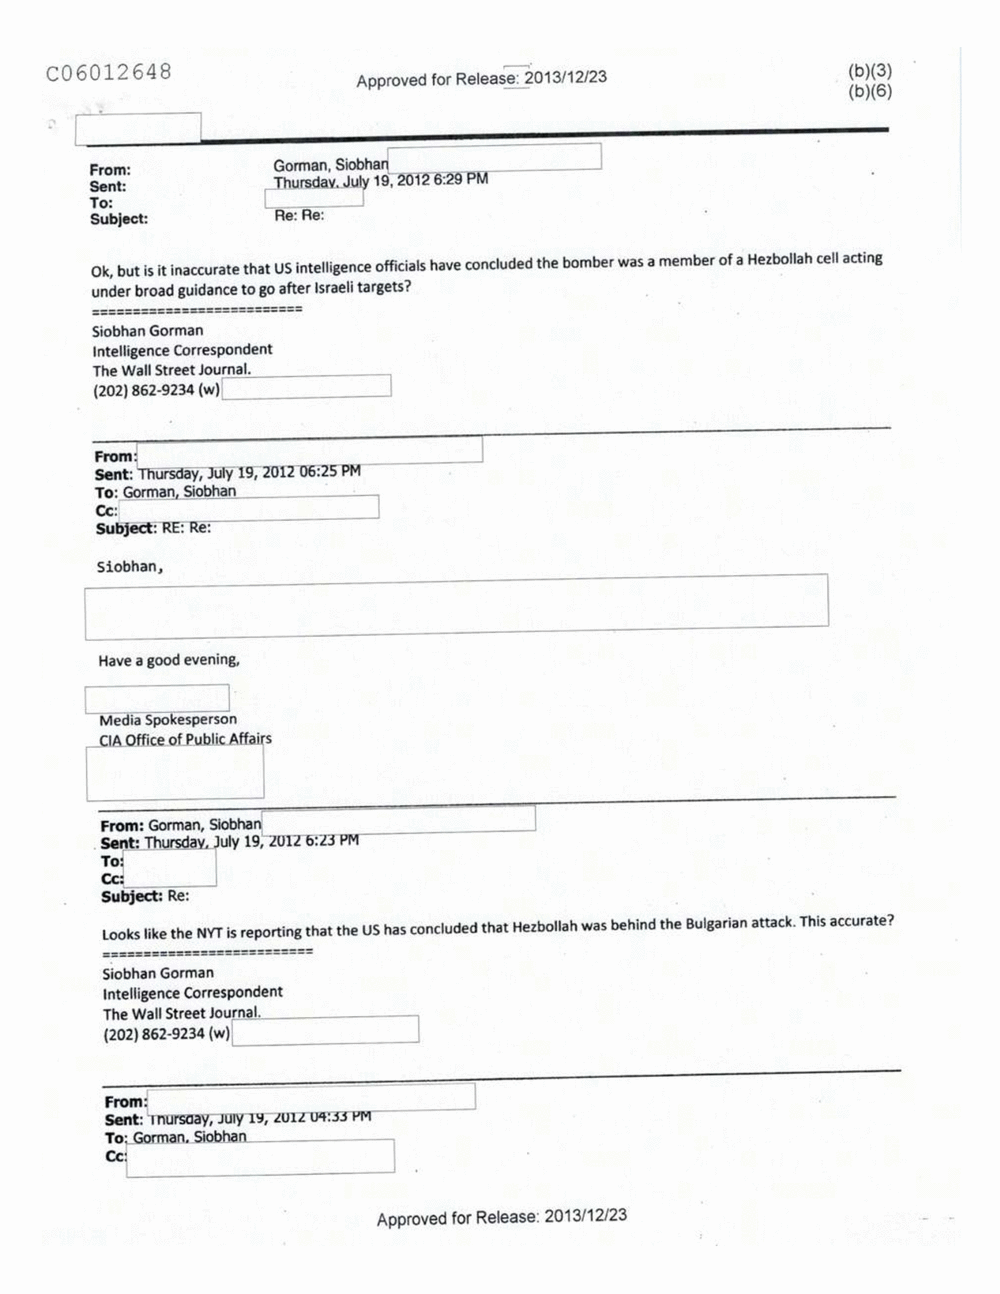 Page 218 from Email Correspondence Between Reporters and CIA Flacks